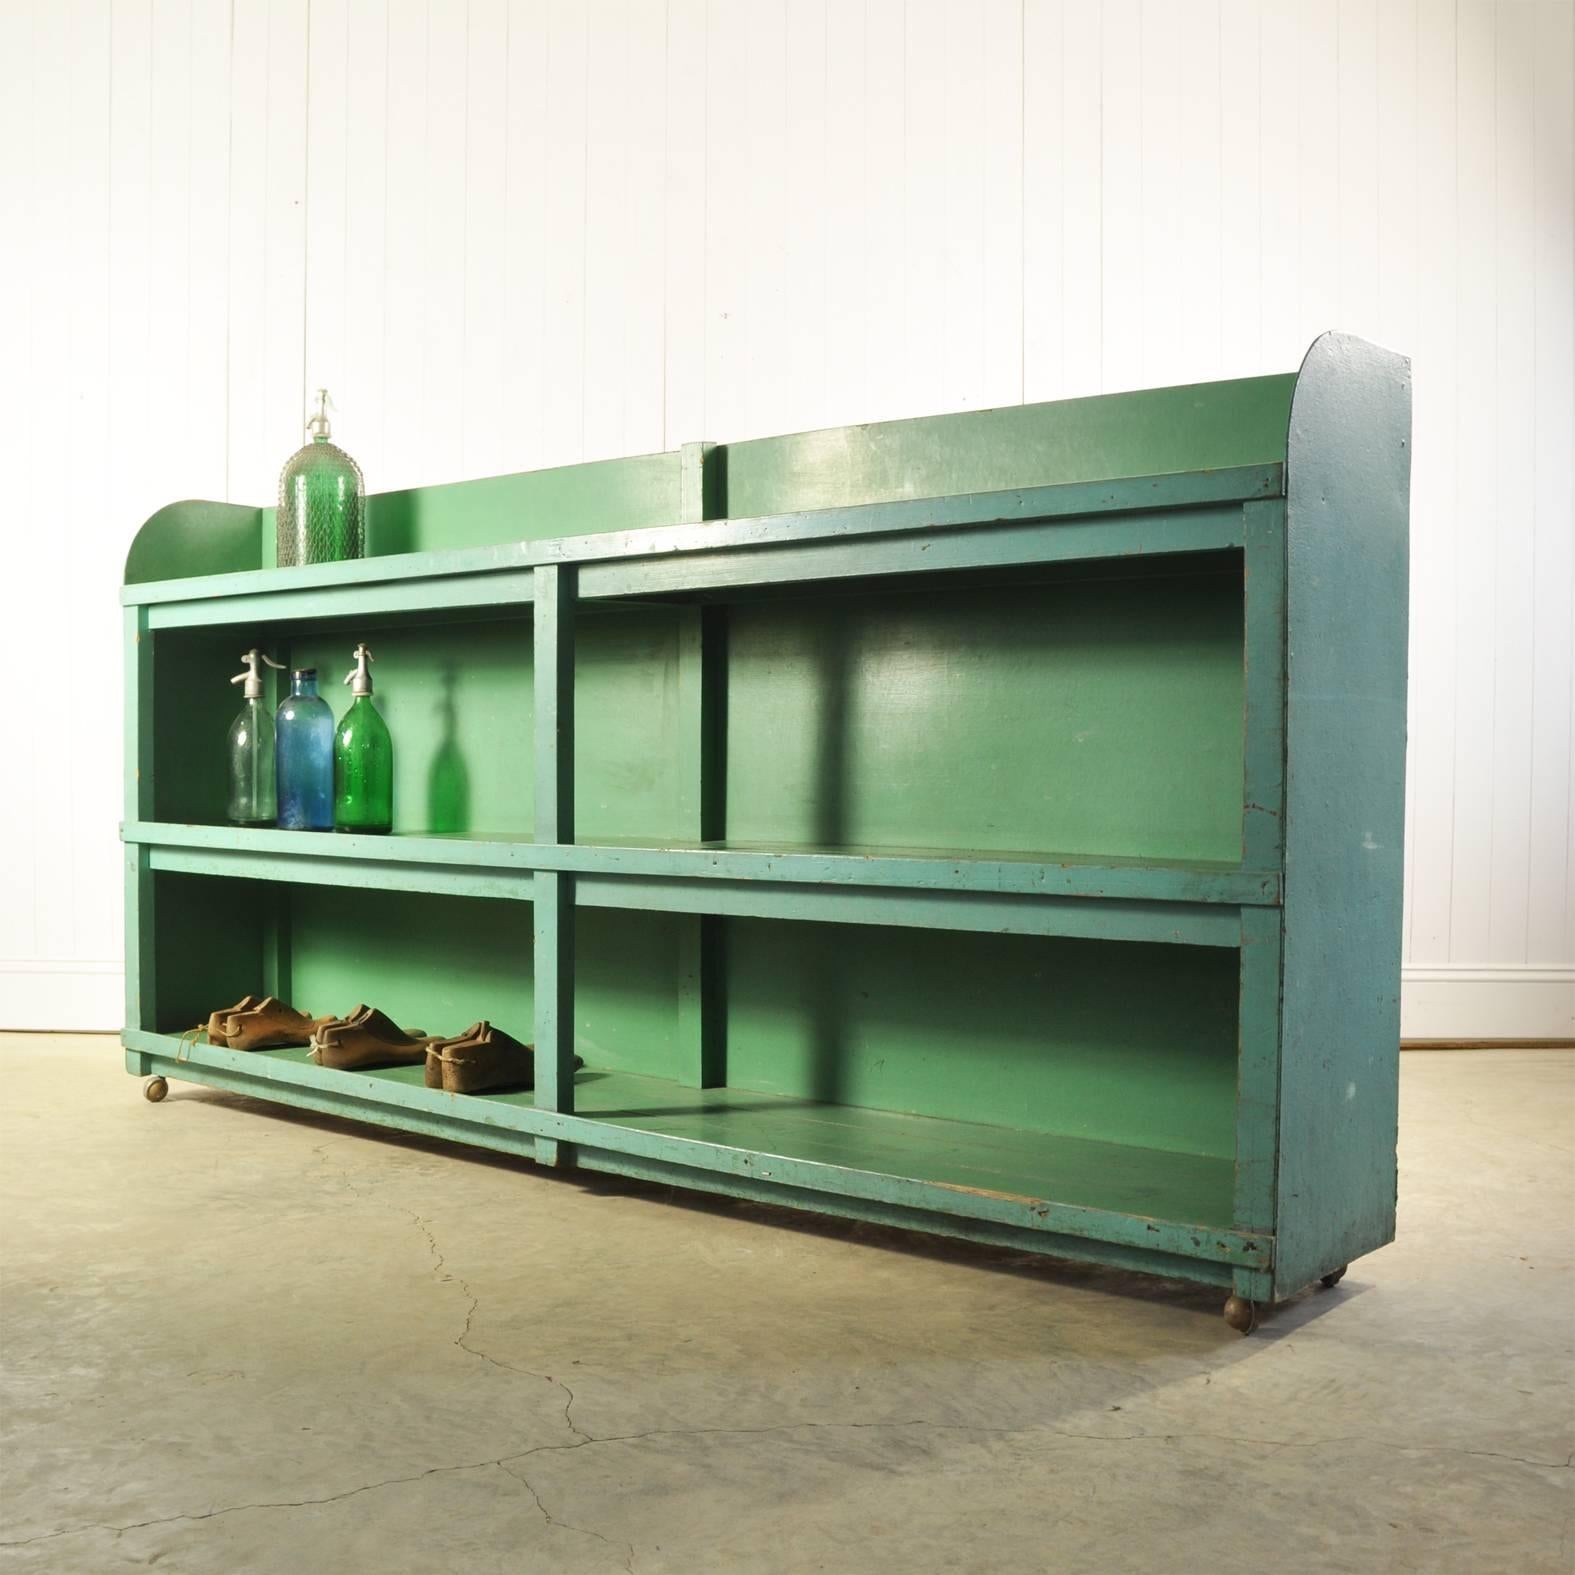 This shelving unit was sourced from a factory in the Czech Republic, circa 1950s-1960s.

Completely authentic with some marks, bumps and scrapes to the original paint.

Original castors, which are ok but not brilliant.

Extremely